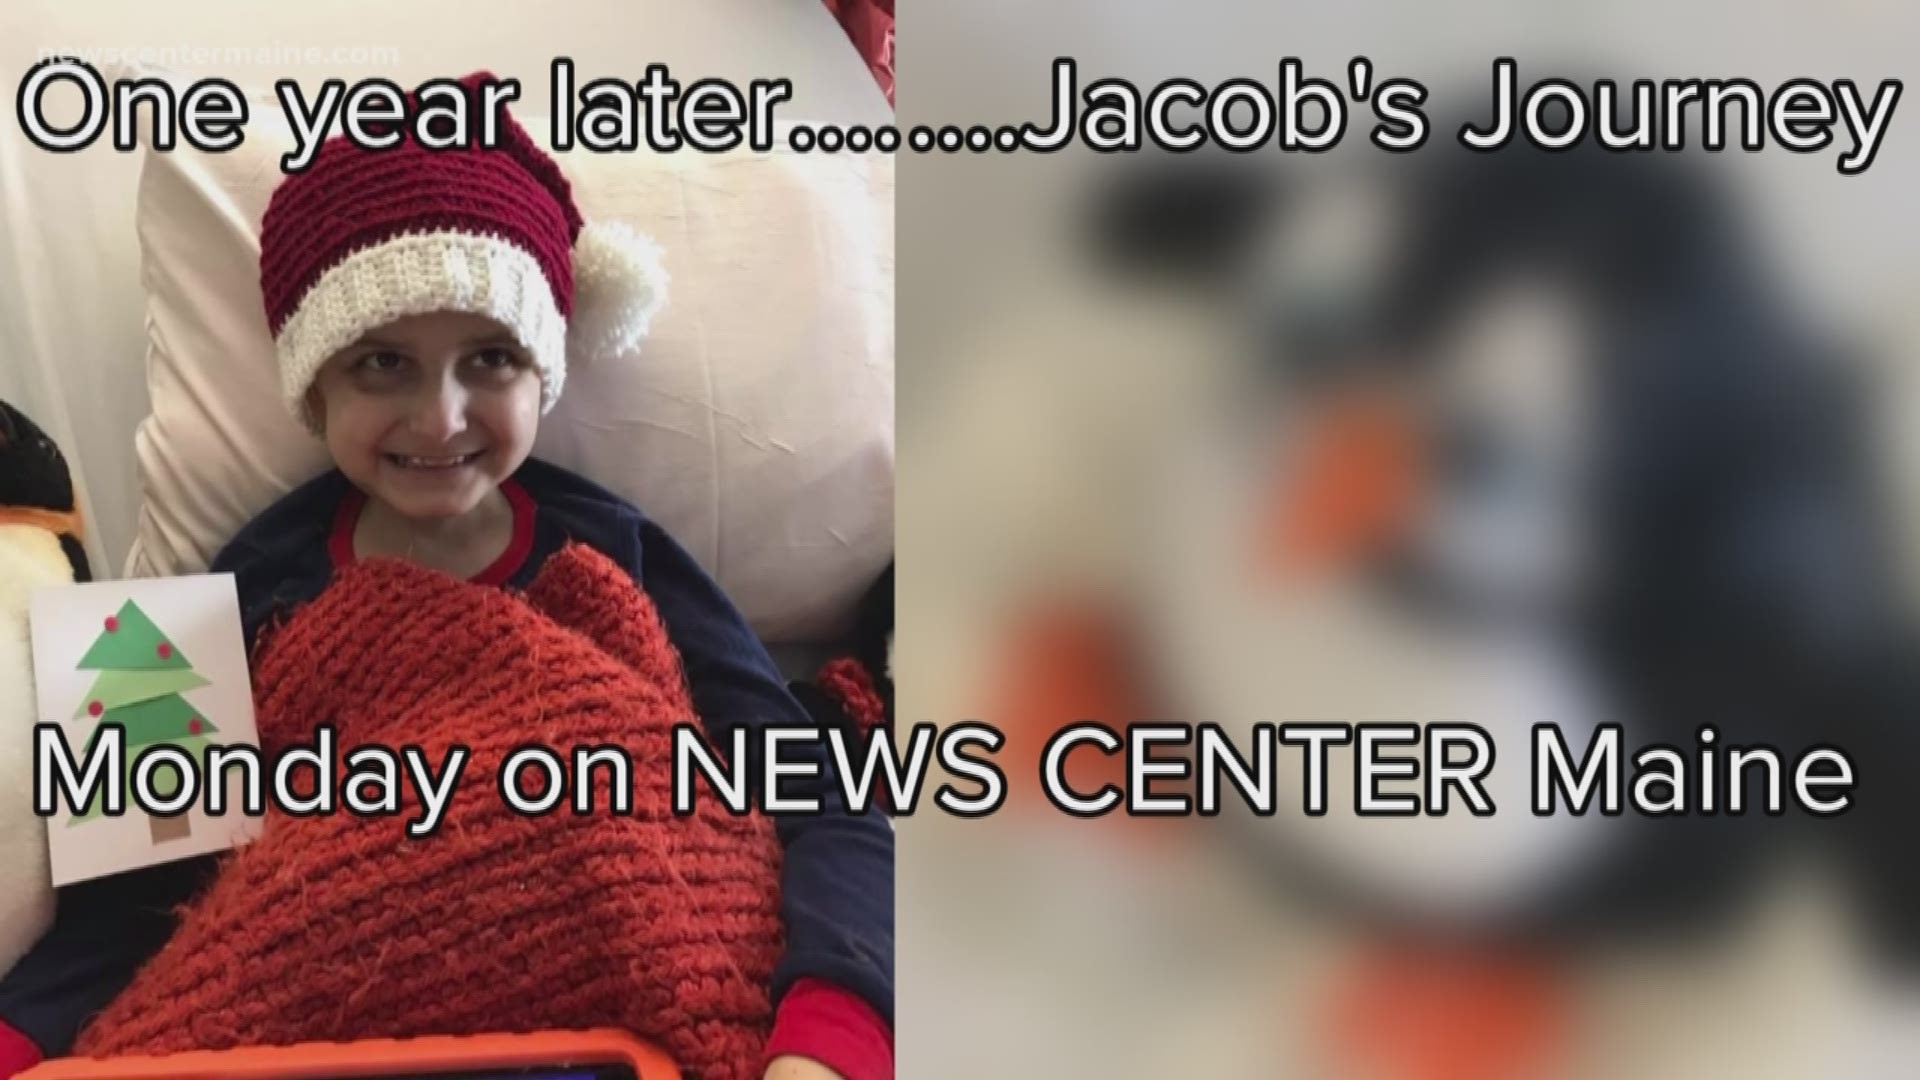 One year after Jacob's death, our own Lee Goldberg visits Jacob's family to reflect on the magnitude of all that generosity and the causes they've taken on as part of Jacob's legacy